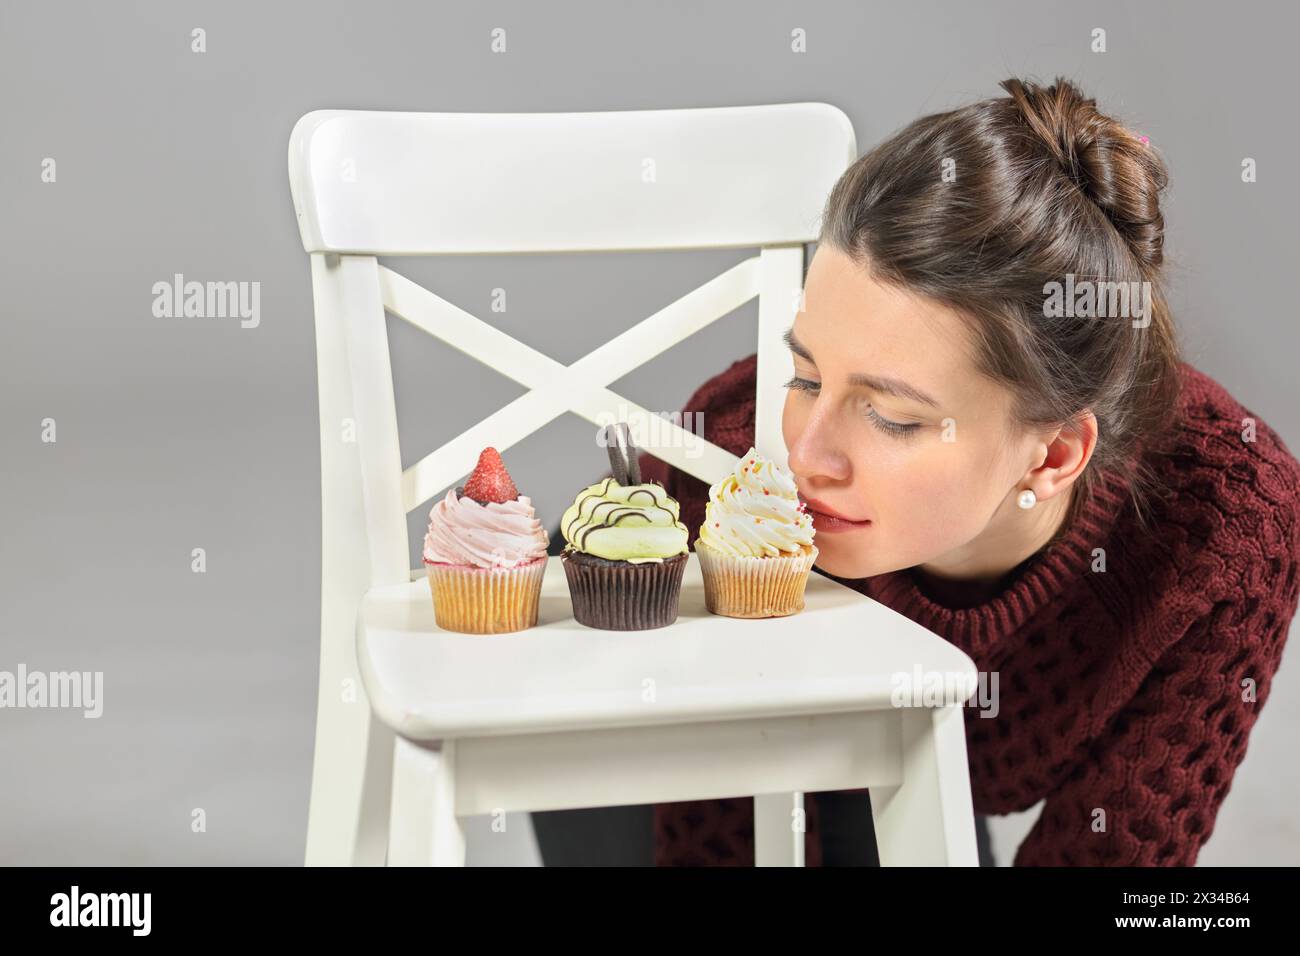 Three cakes stand on white chair, young girl bent over cake on his knees Stock Photo